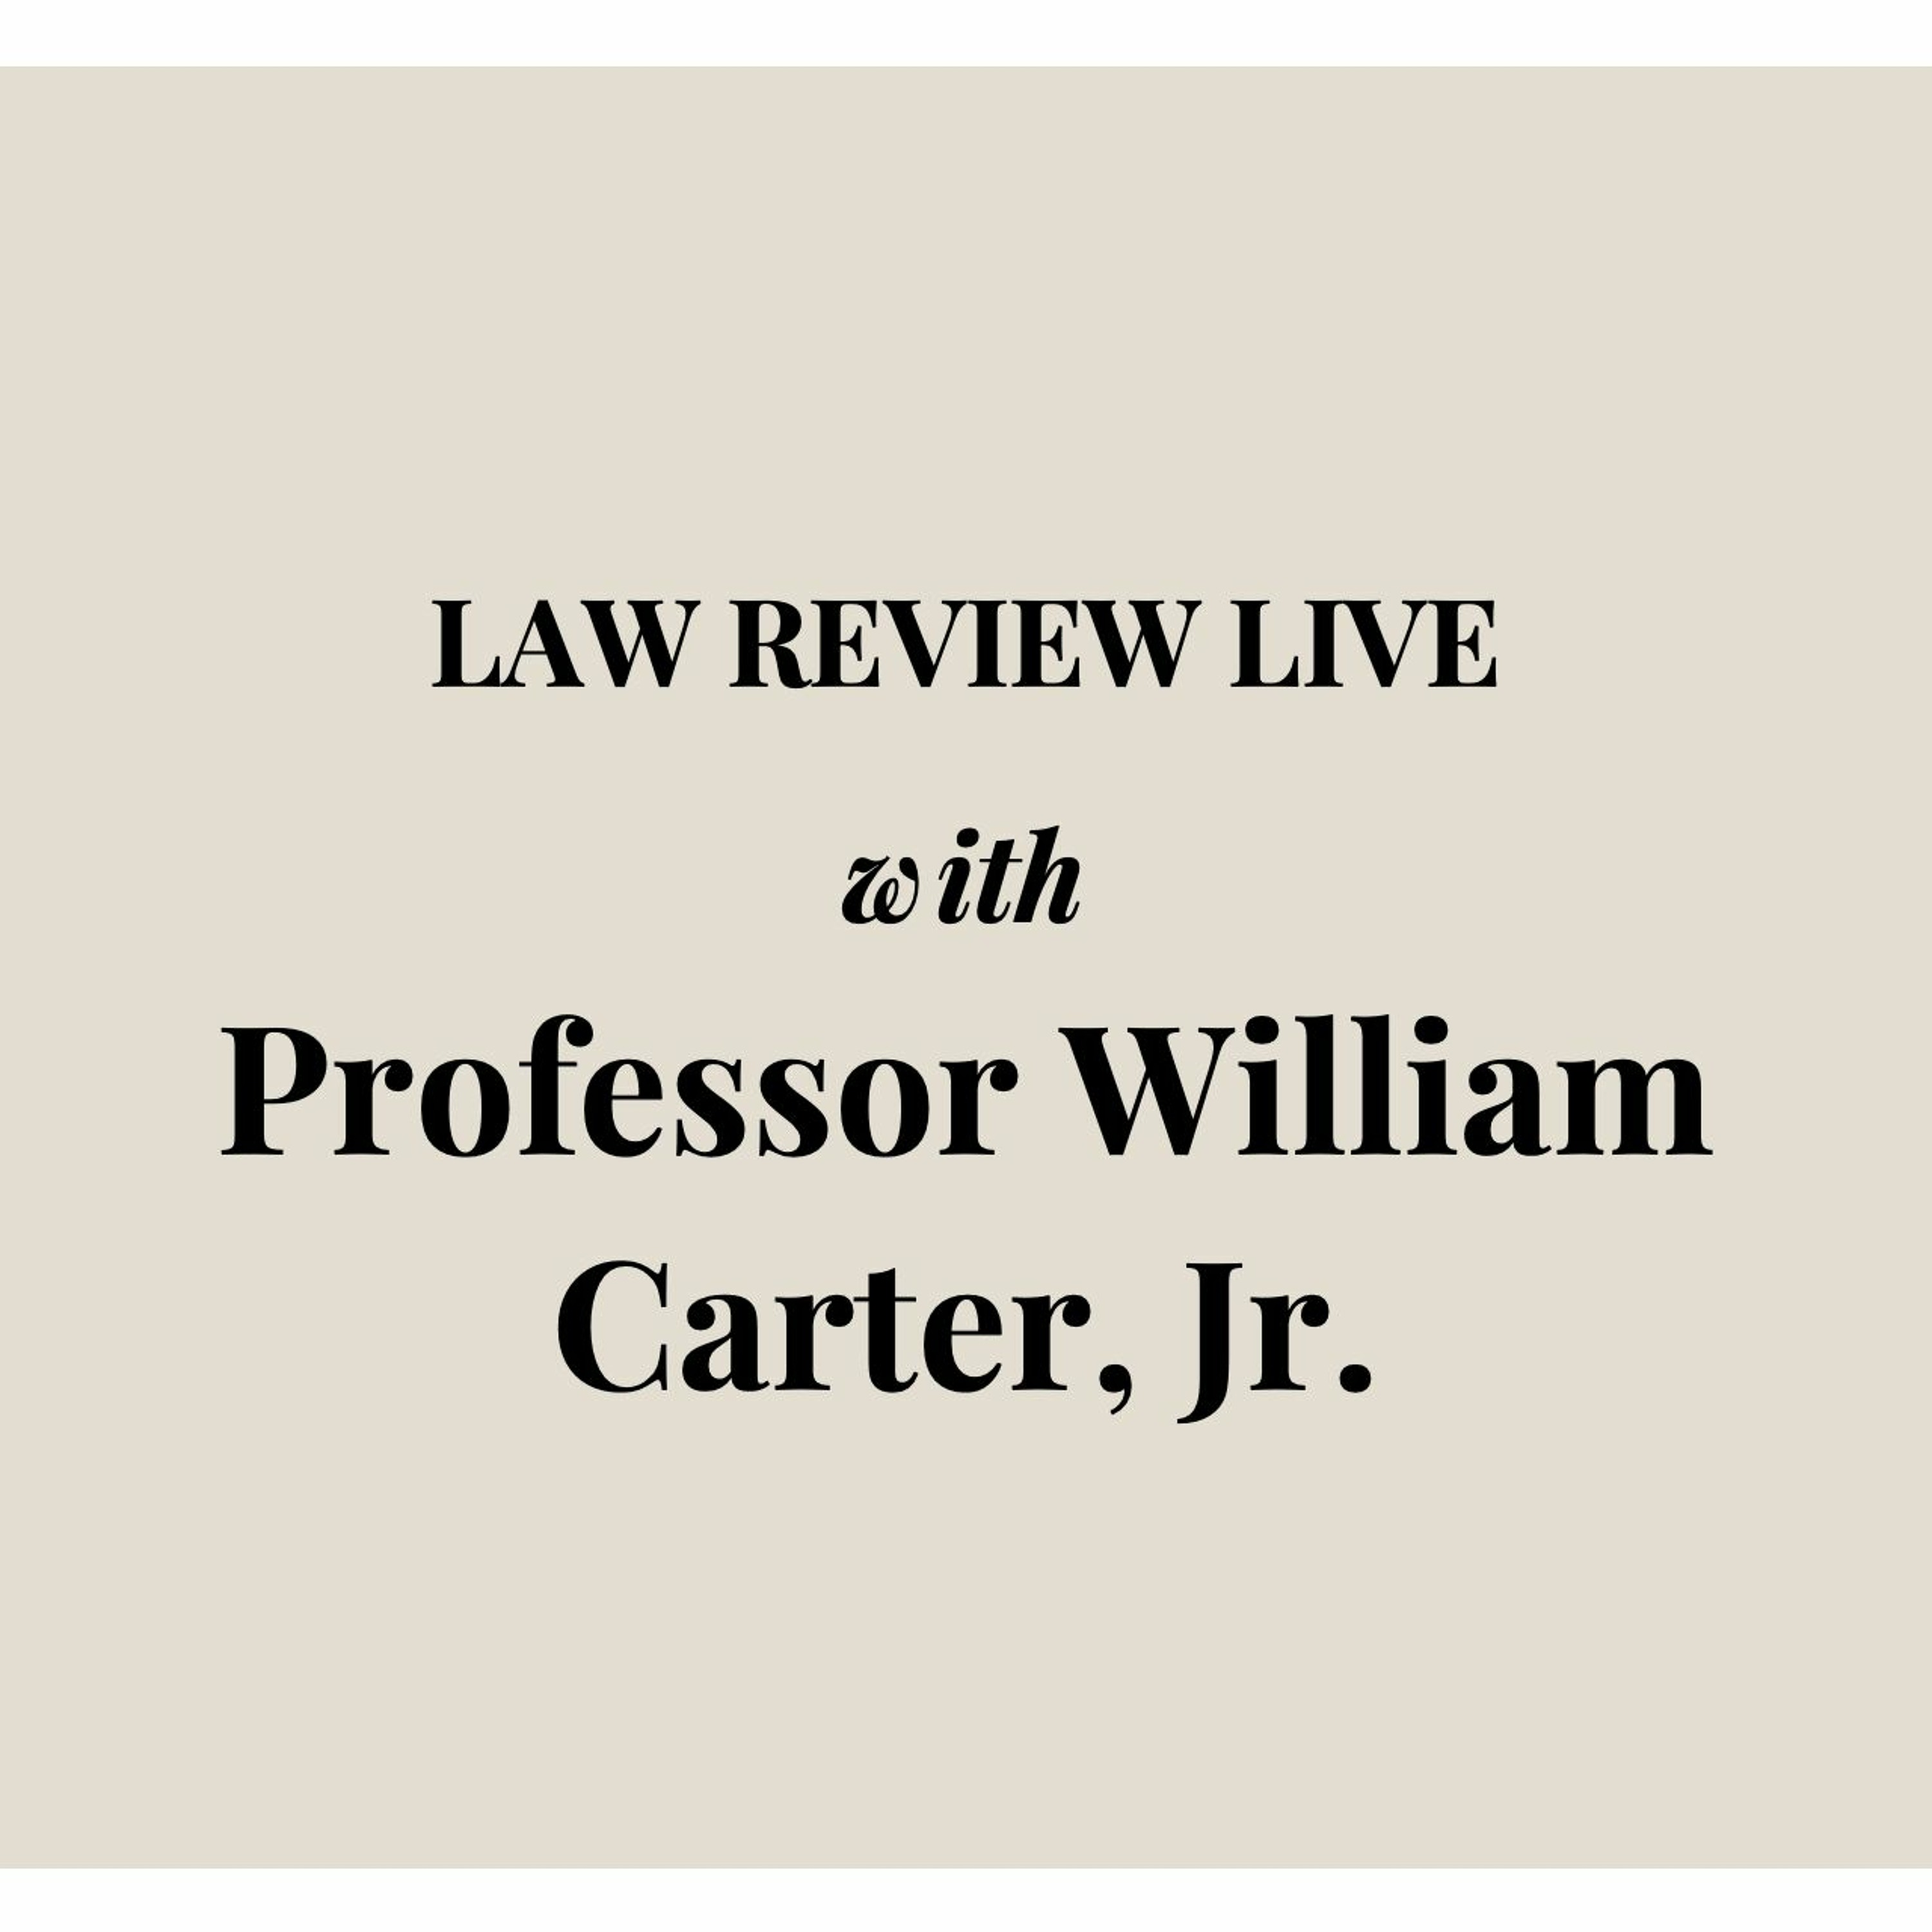 Law Review Live with Professor William Carter, Jr.